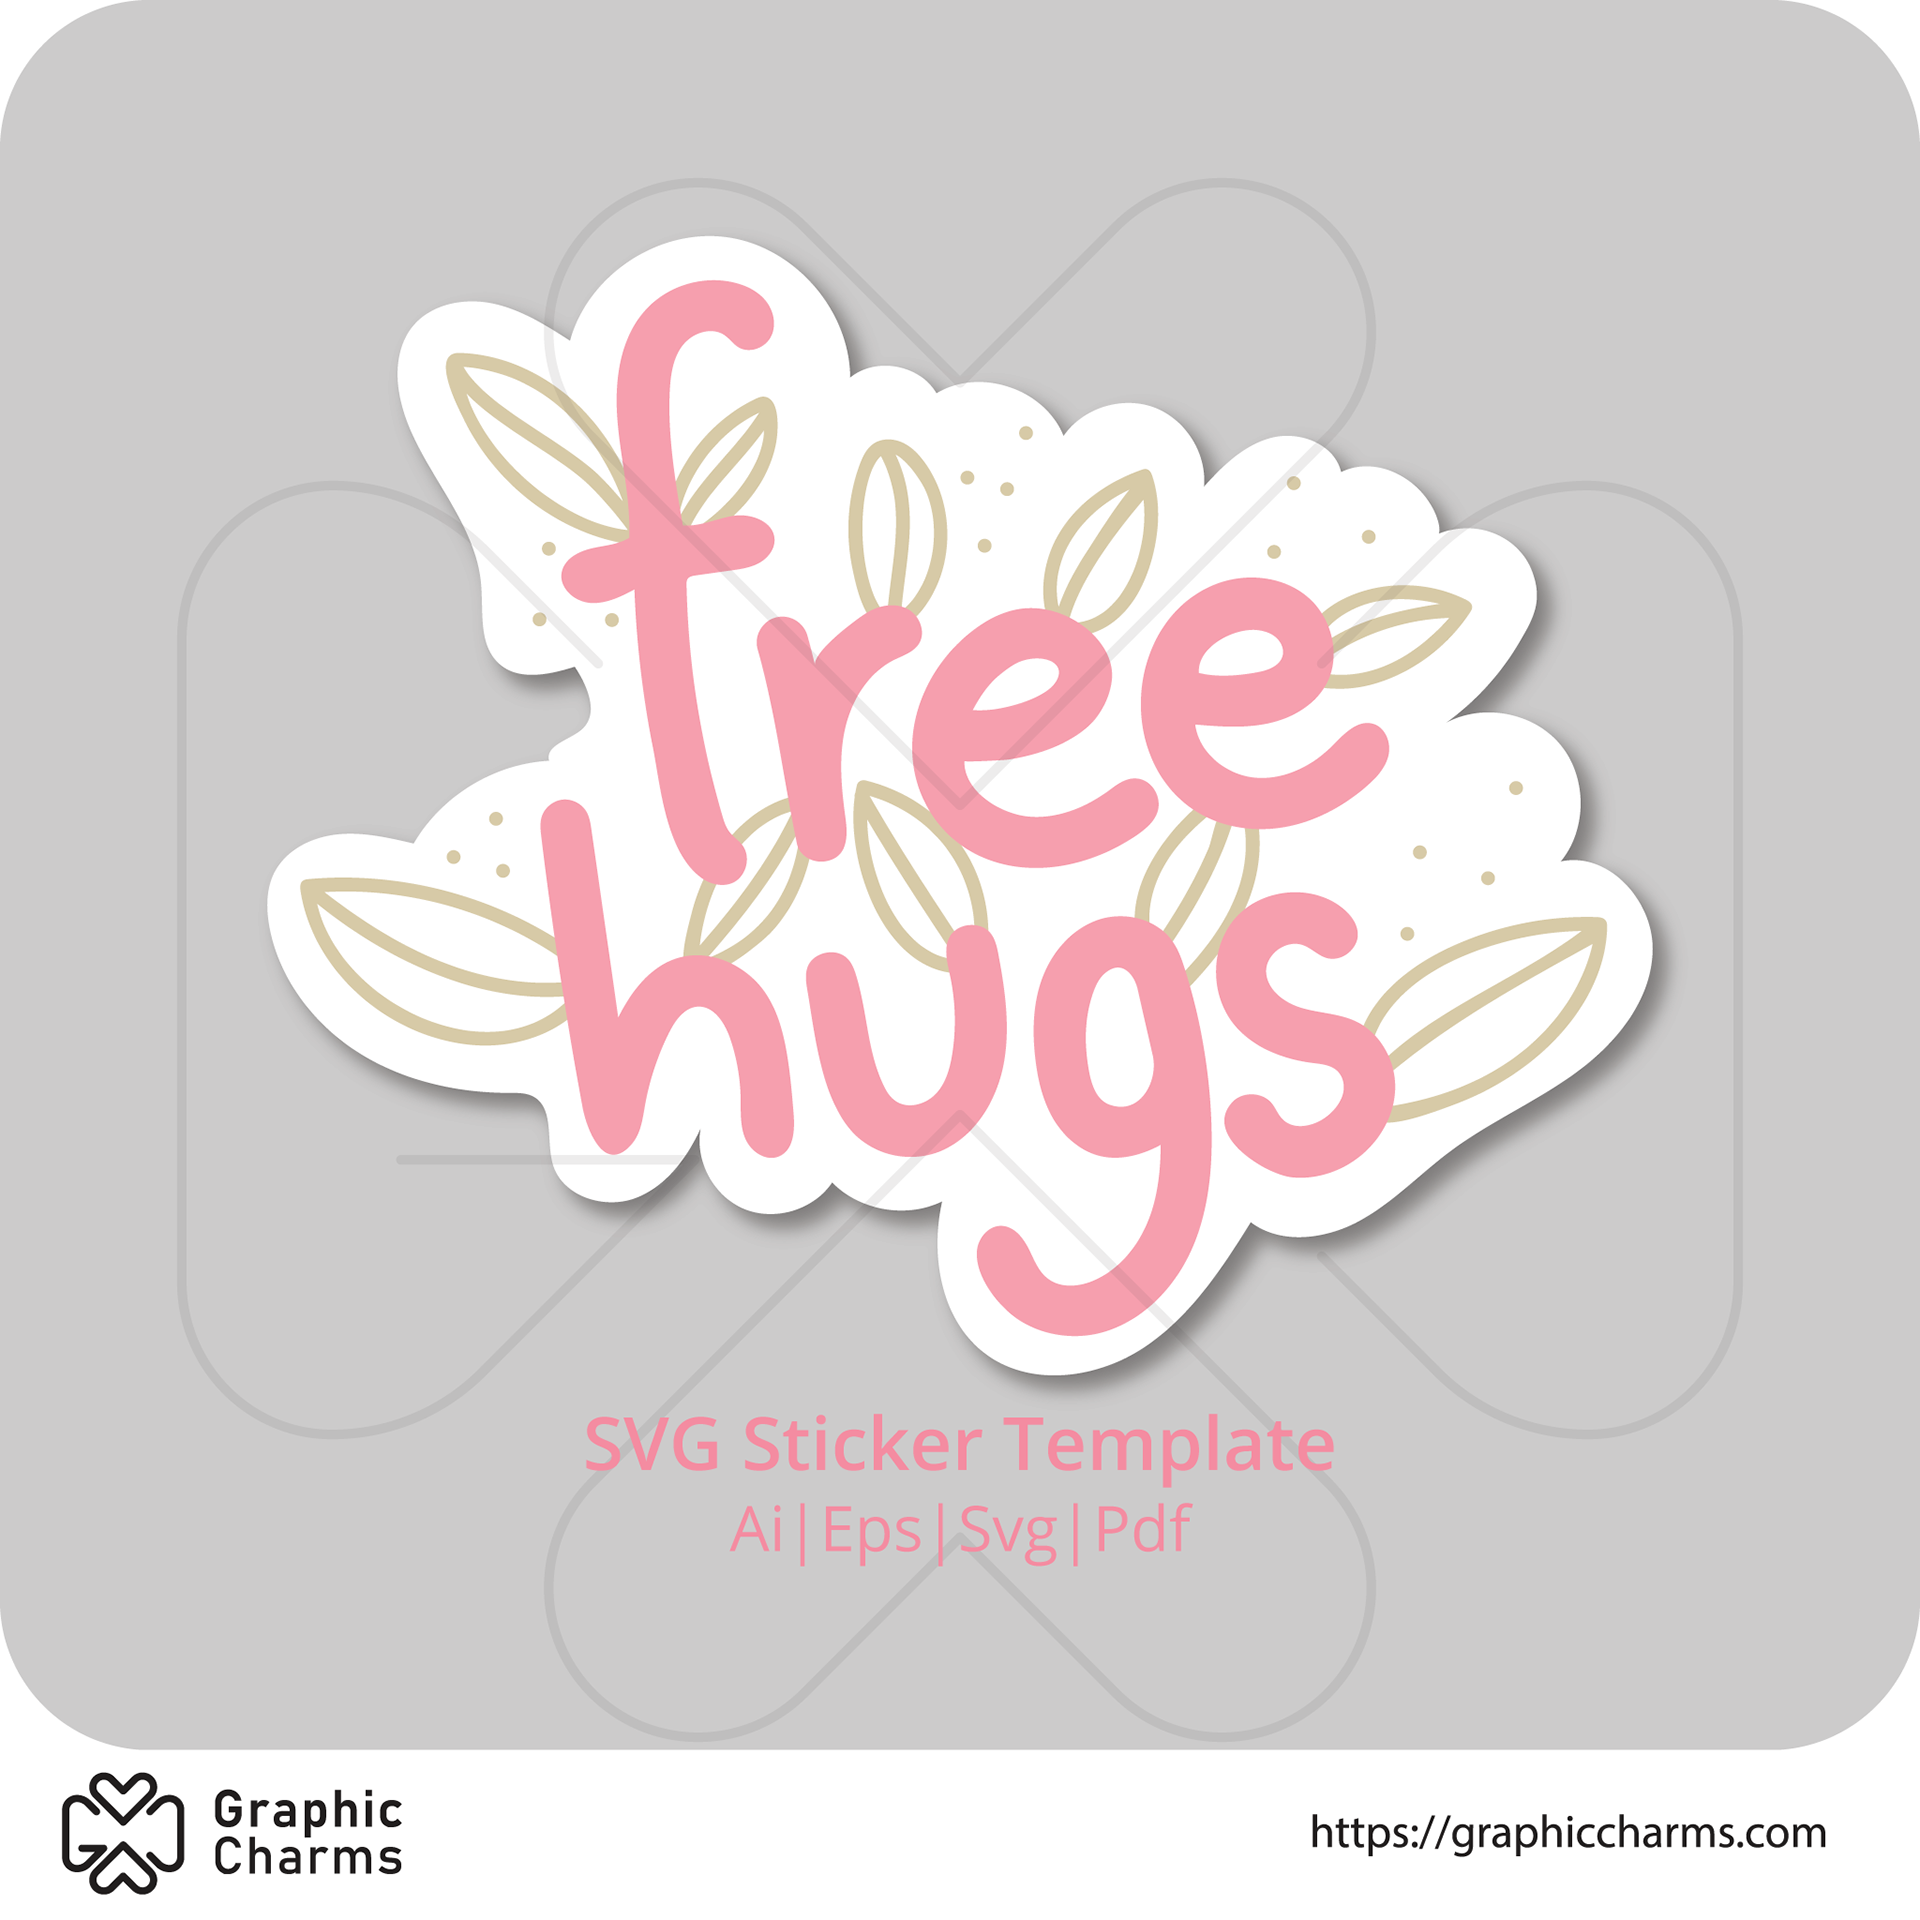 Graphiccharms Free Hugs Svg Graphics Sticker Design Template